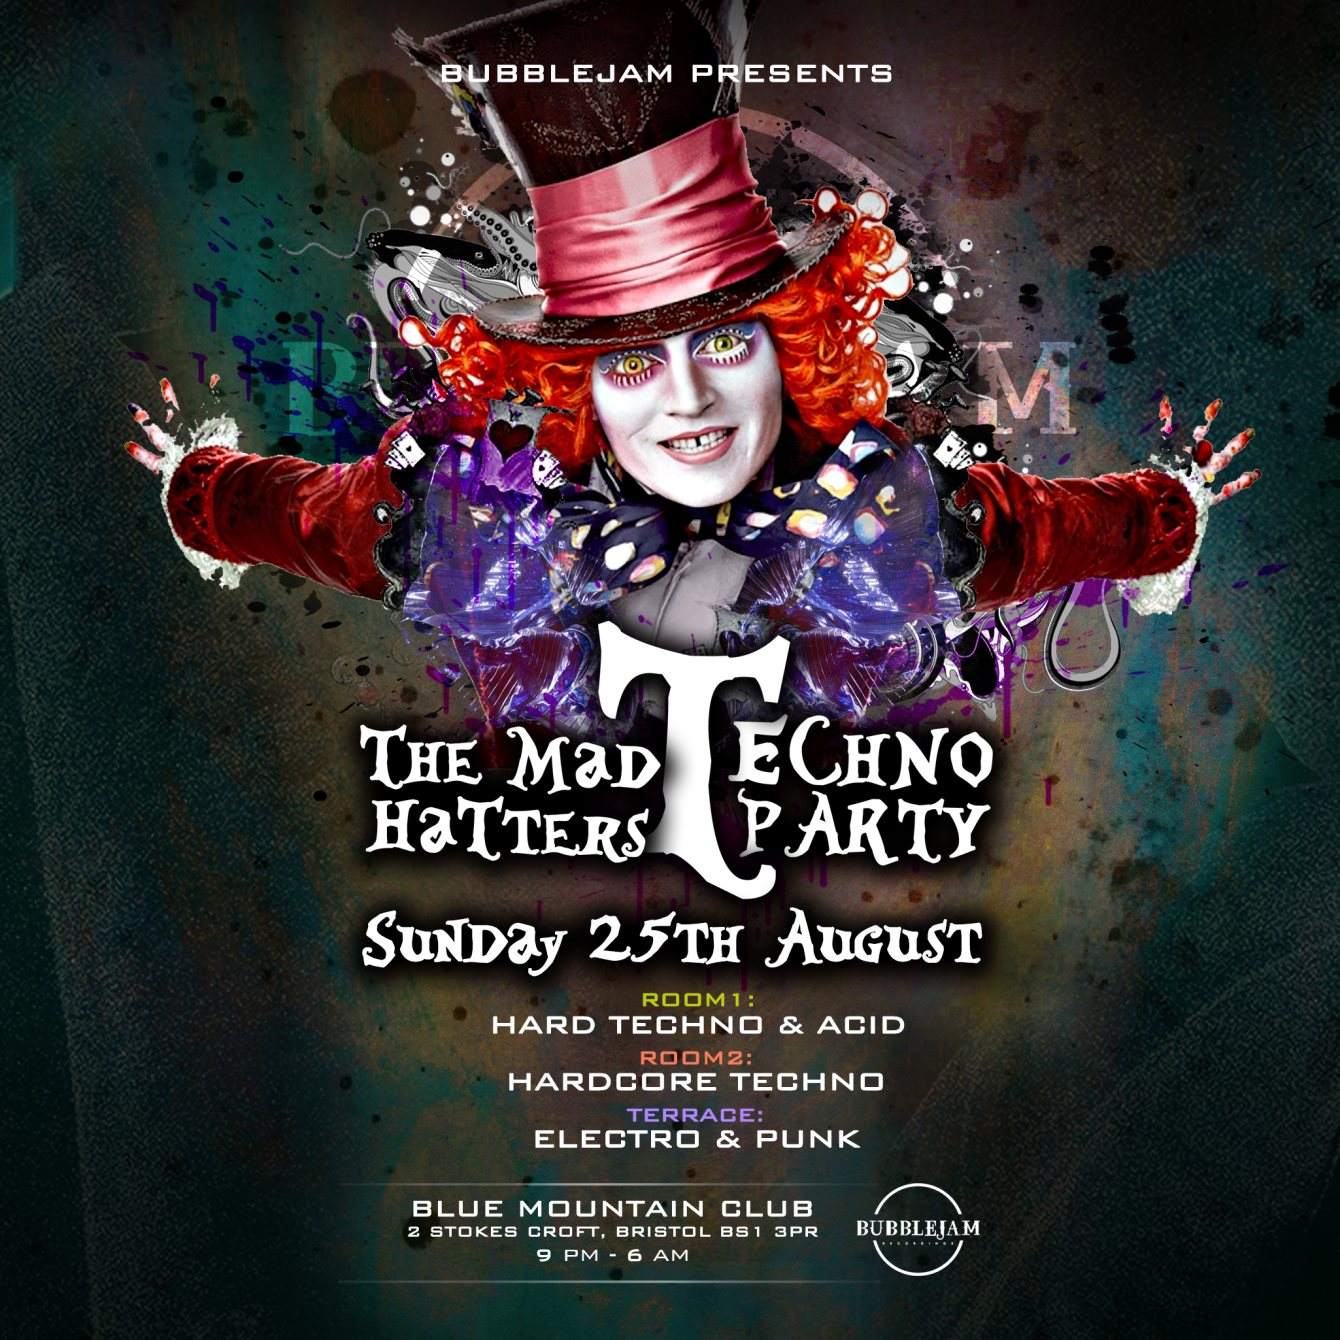 Bubblejam presents The Mad Hatters Techno Party - Página frontal